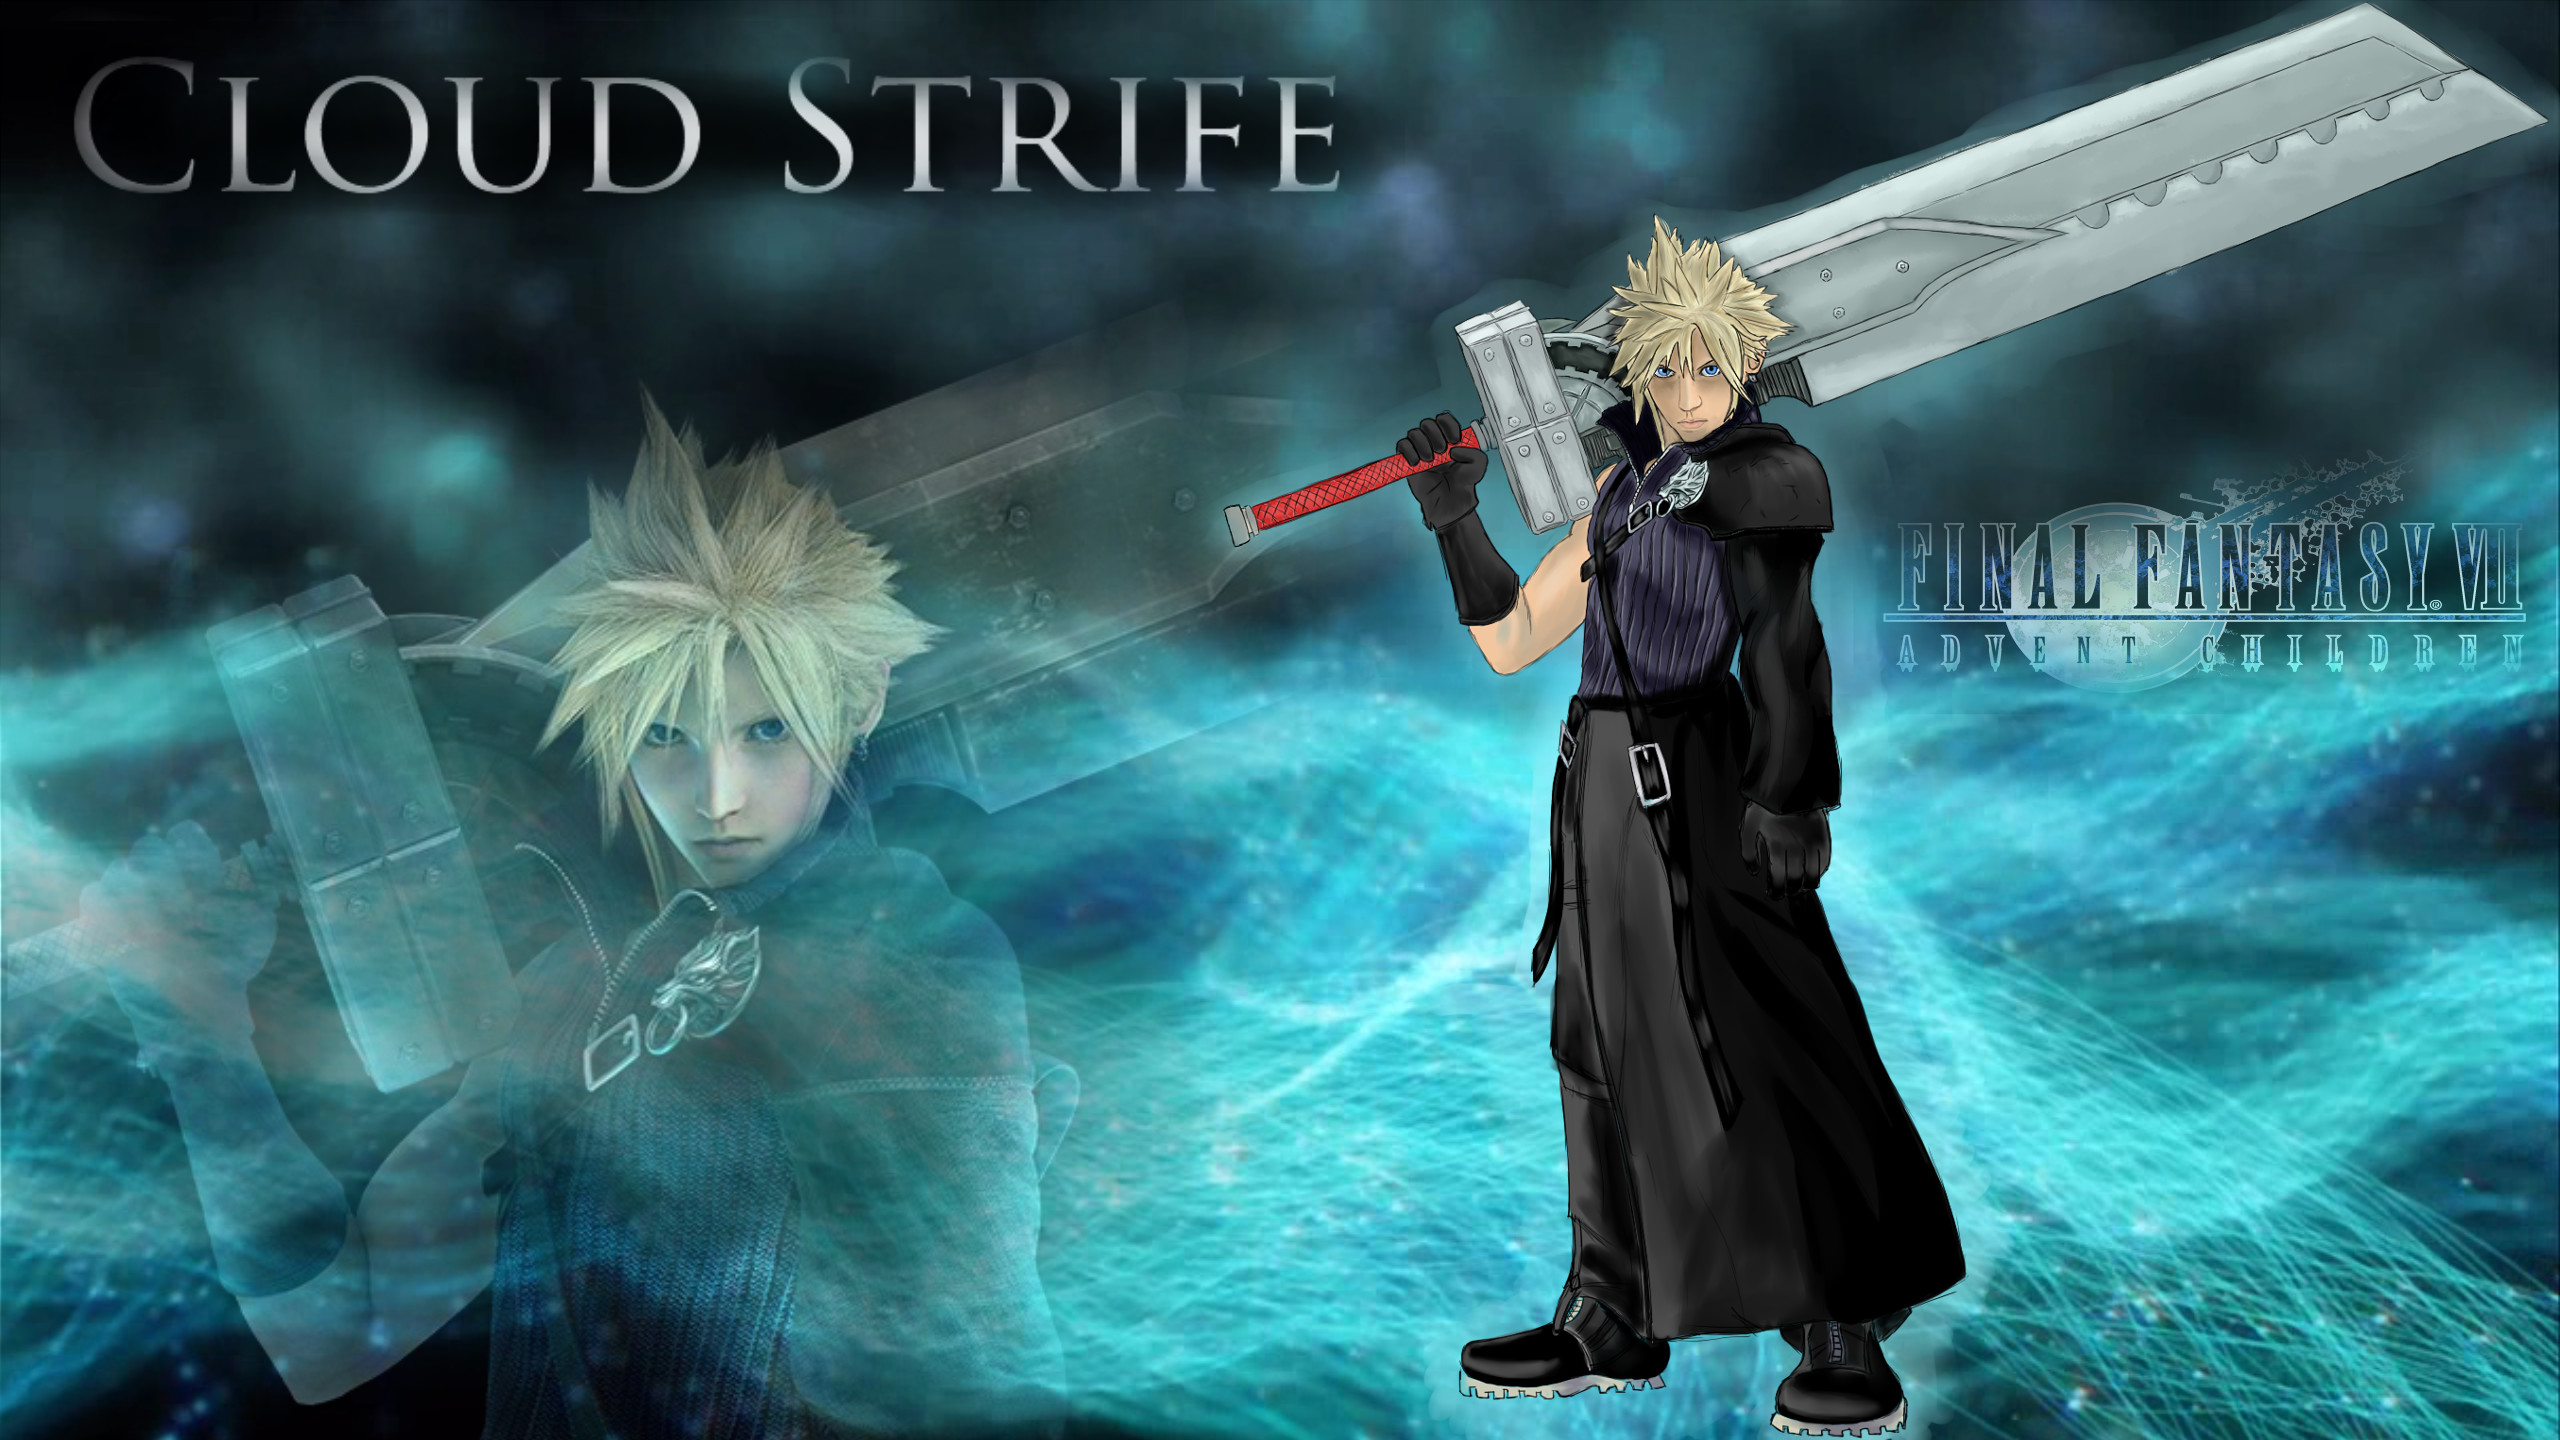 Cloud Strife Wallpaper 2 by Robsa990 Cloud Strife Wallpaper 2 by Robsa990